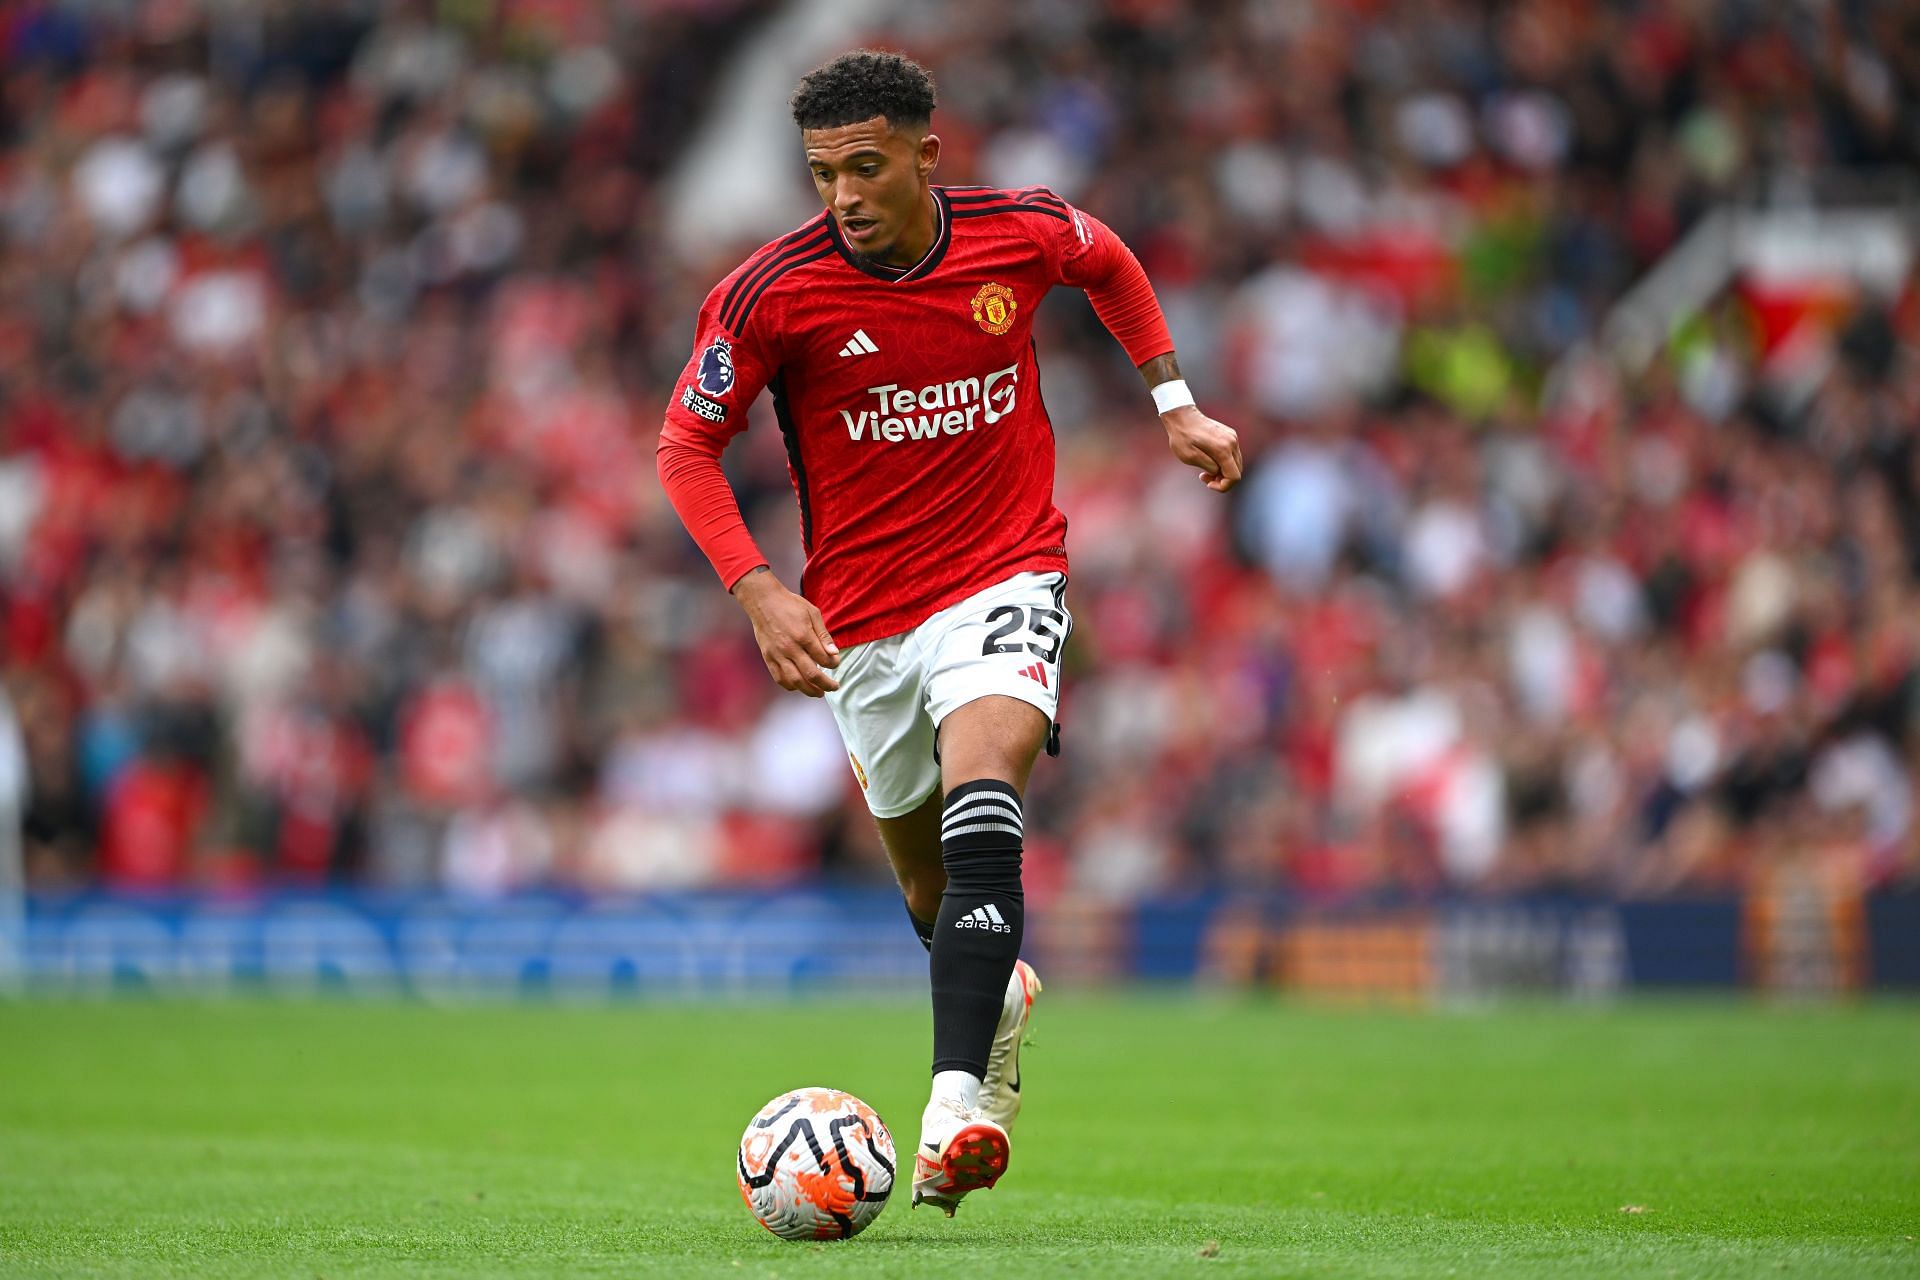 Jadon Sancho could leave the Red Devils on loan in January.